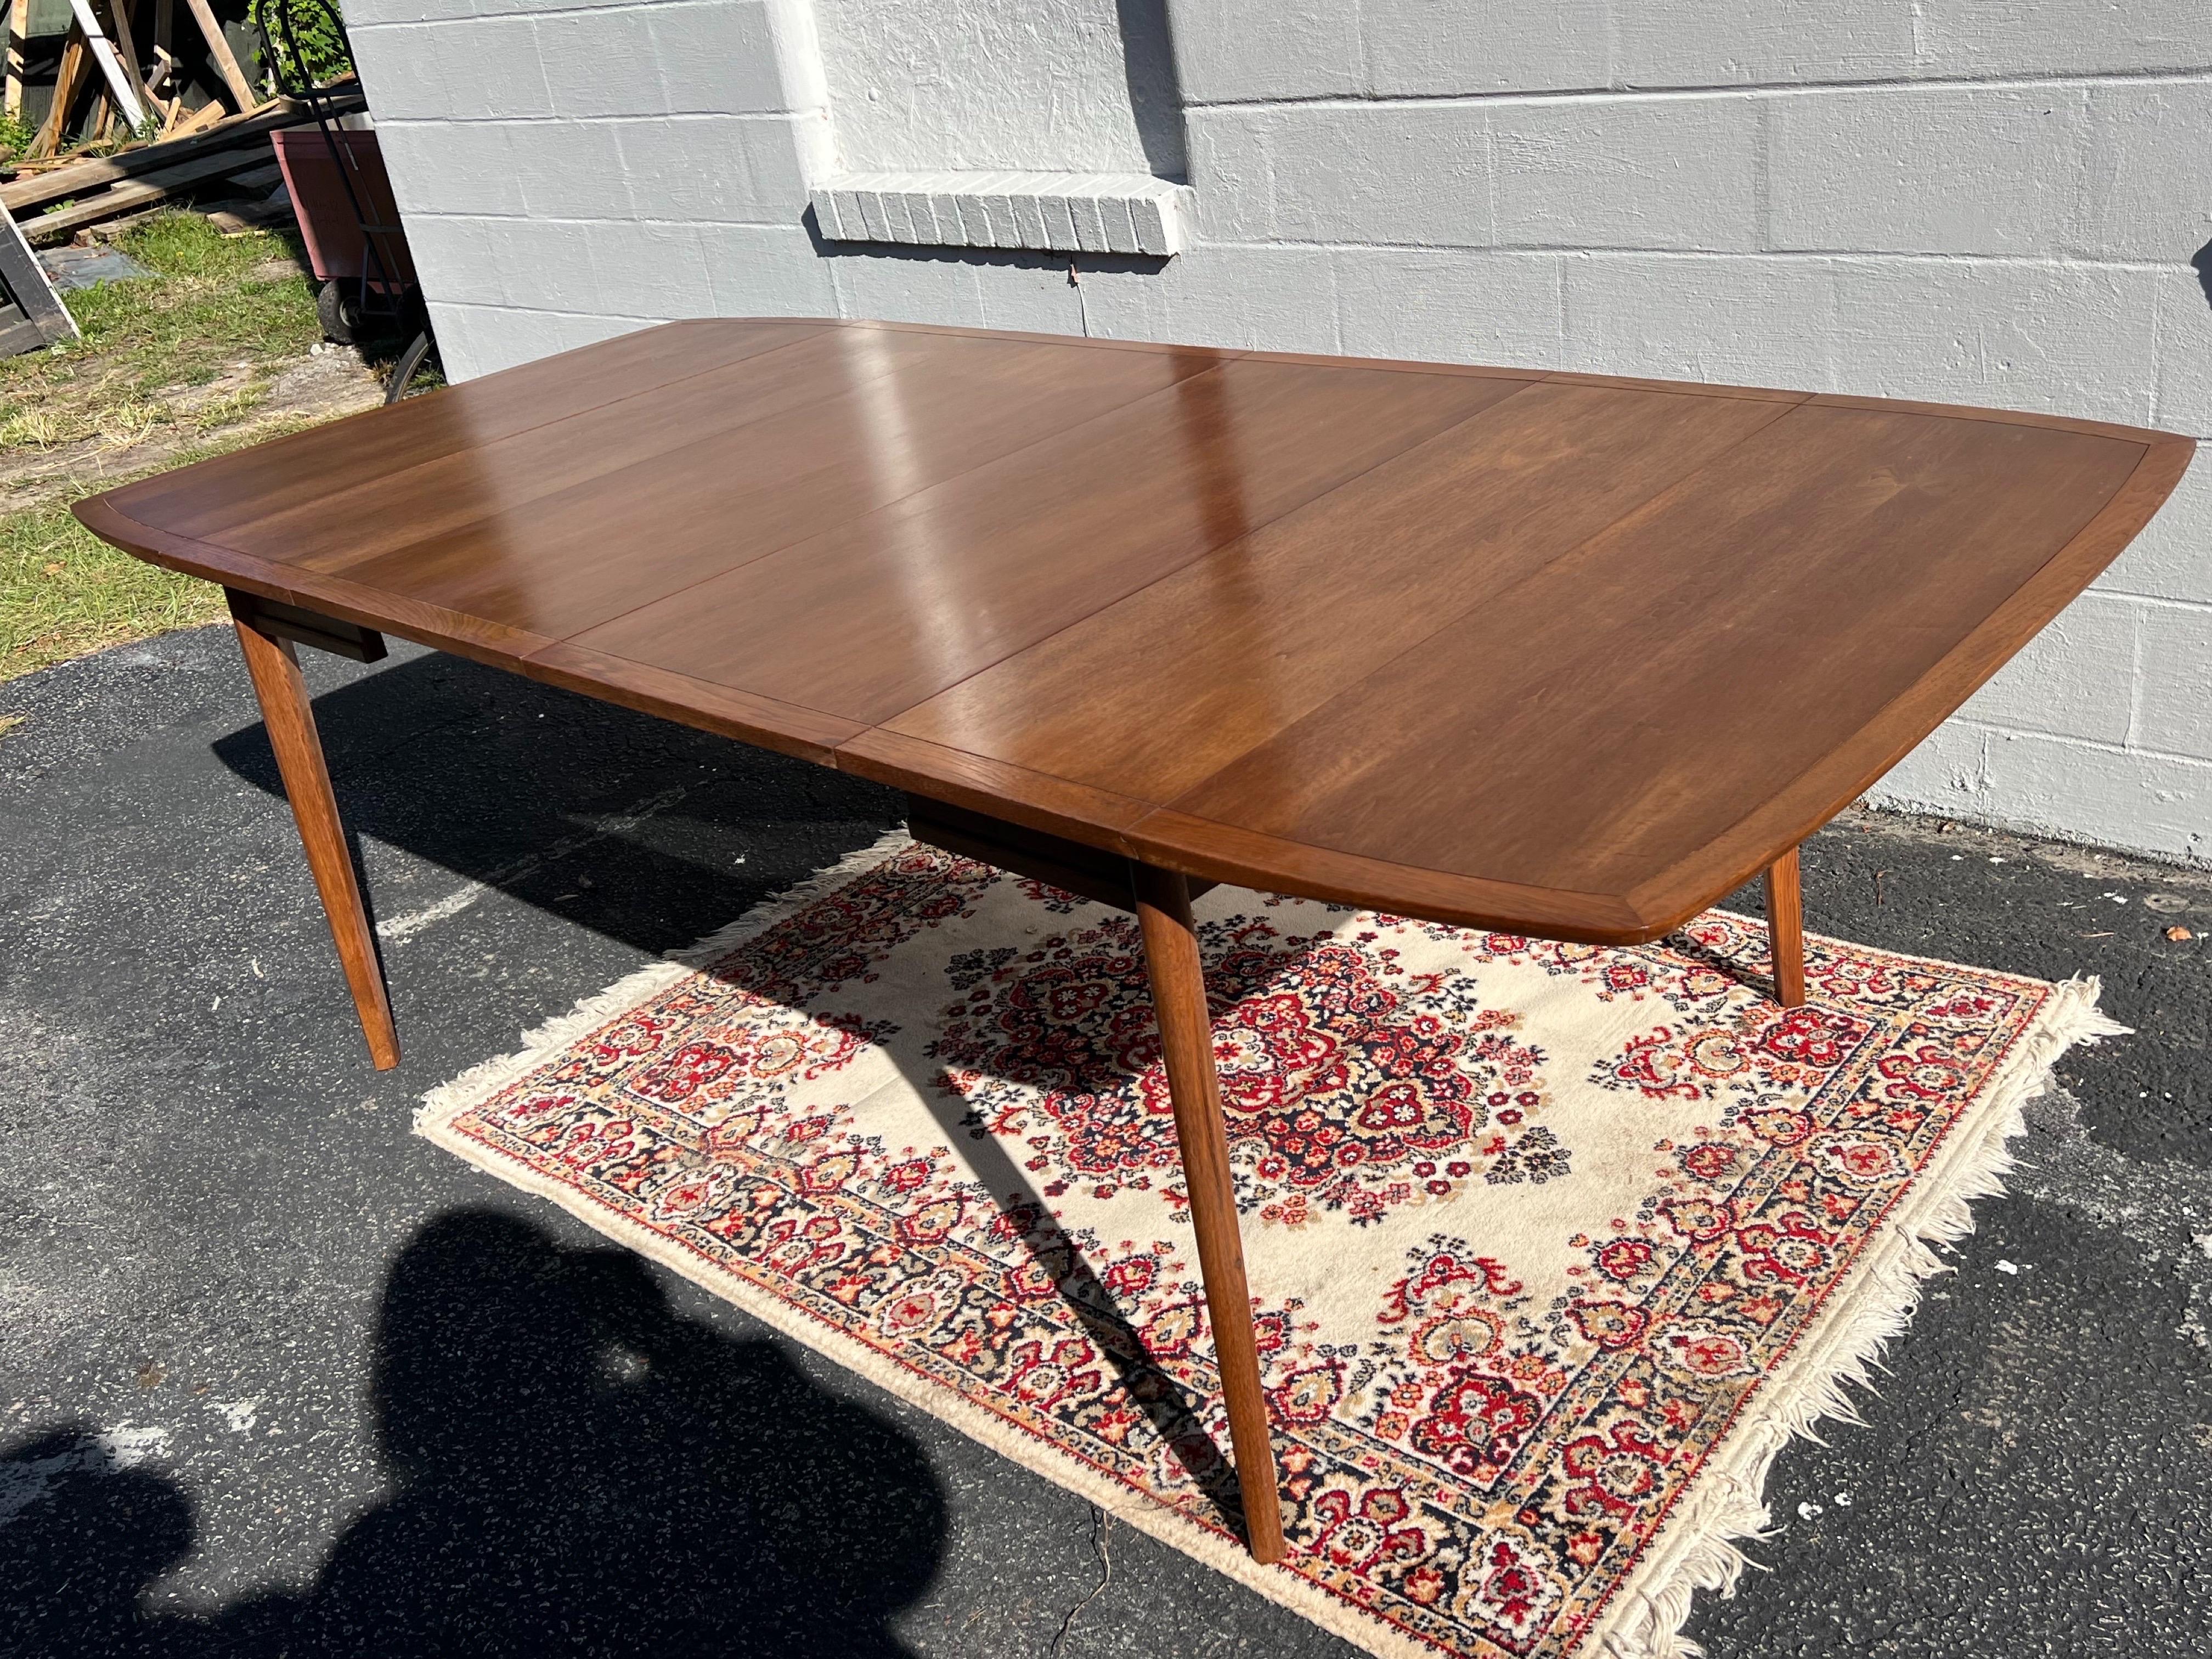 Offering a very nice dining table by Kipp Stewart for Drexel. The table has a beautiful finish and is in overall excellent condition. The table comes with four leaves offering many different size options for the table. The drop-leaf adds the ability